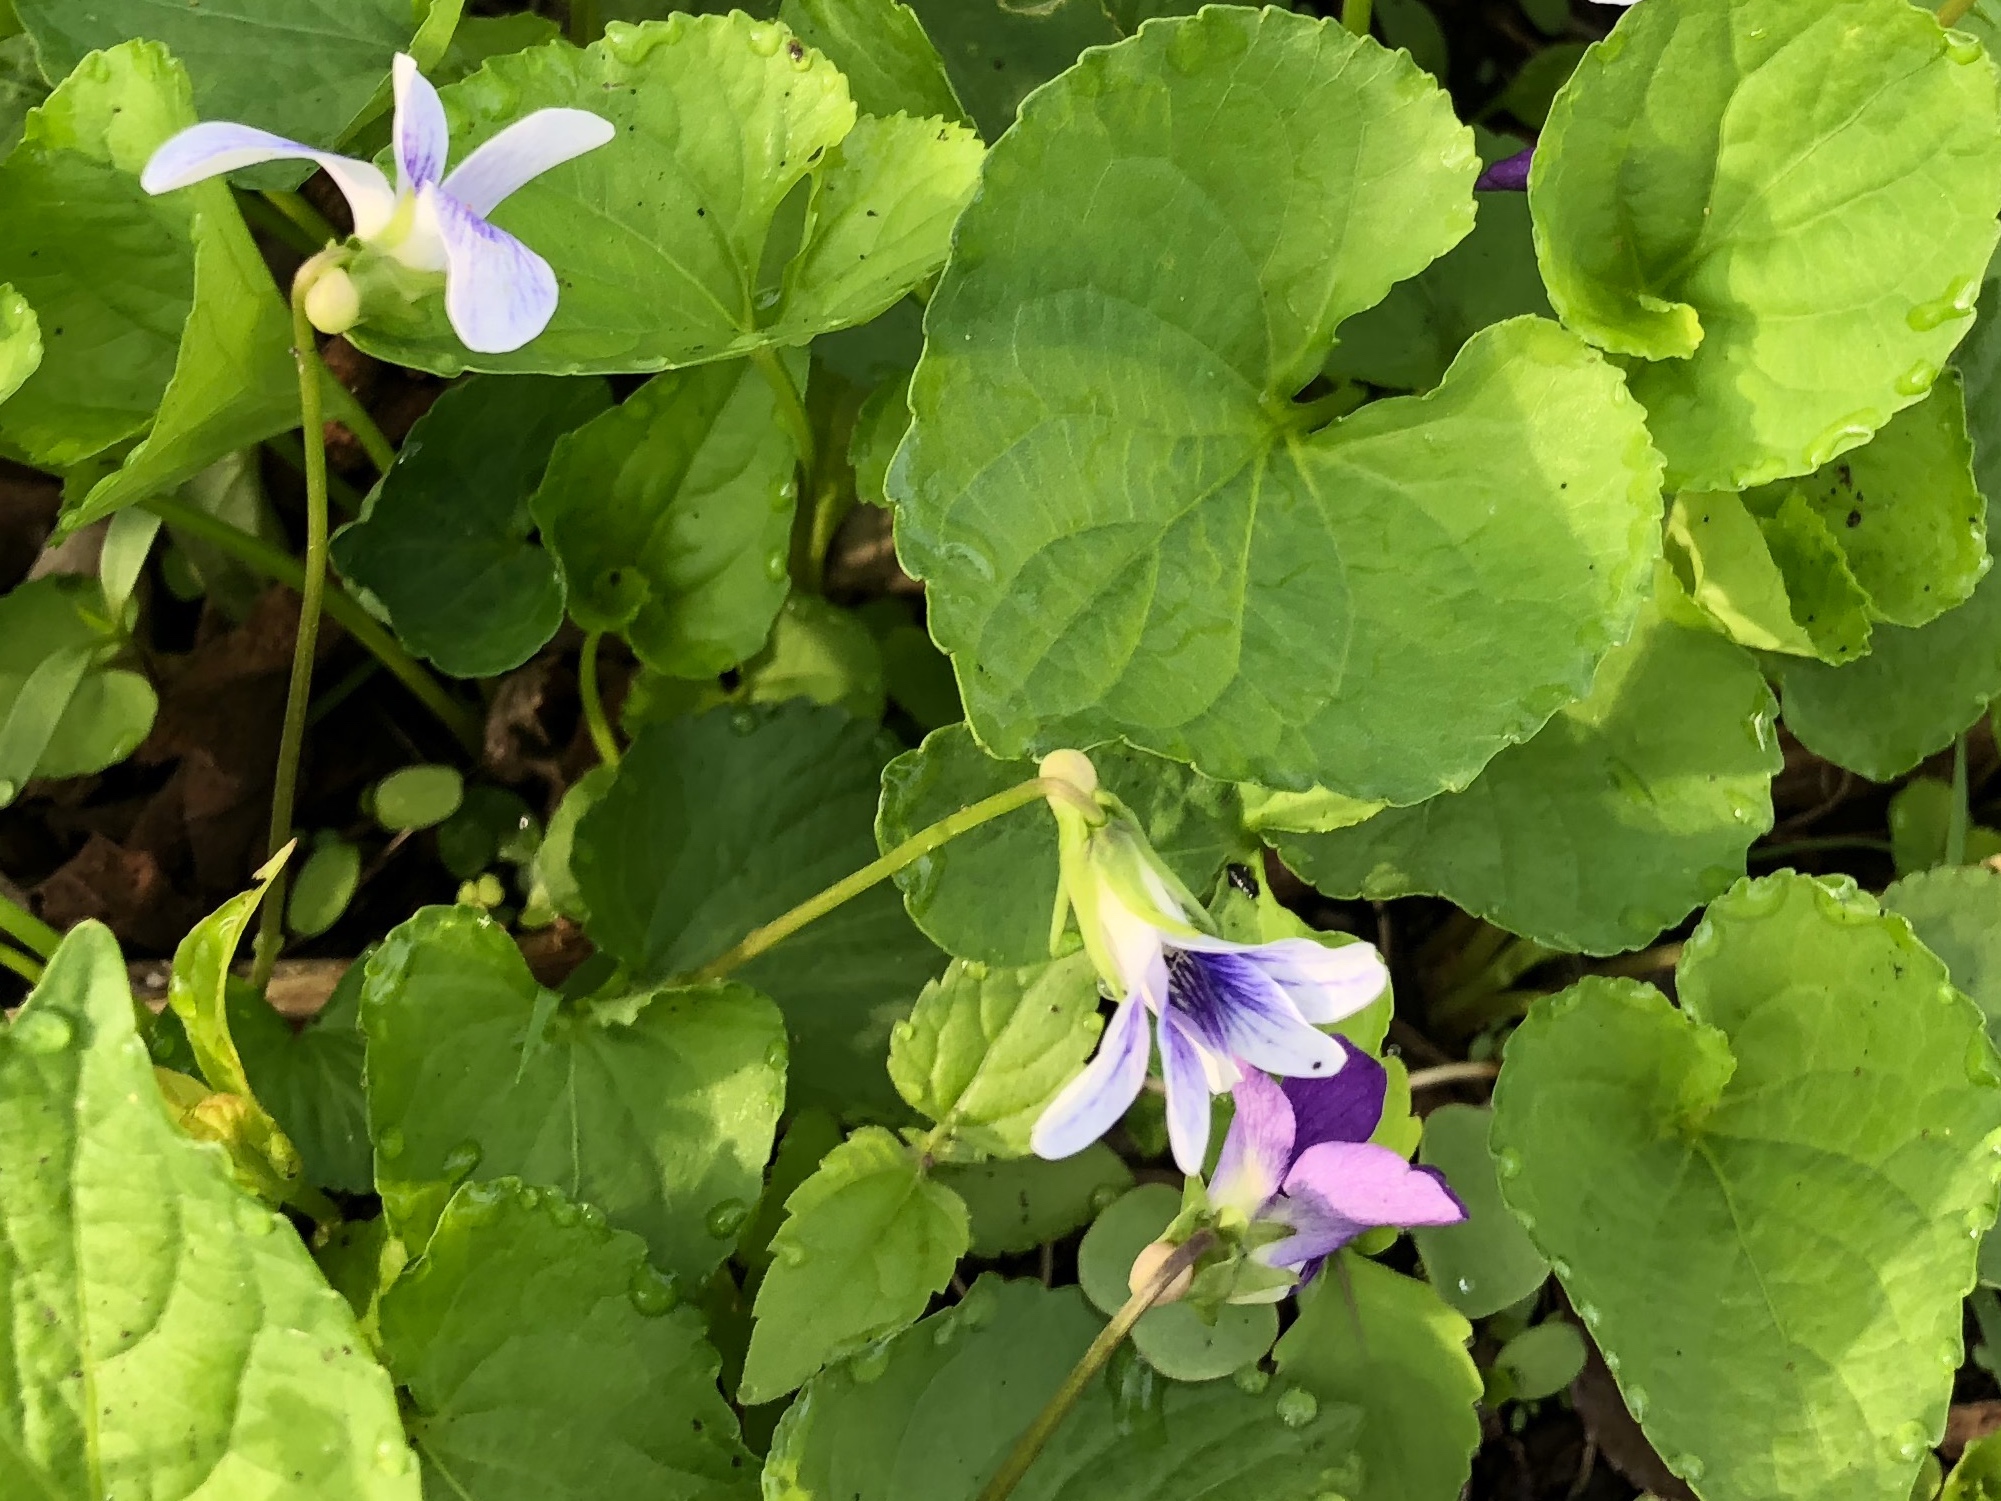 Wood Violets near the Duck Pond on May 15, 2018.